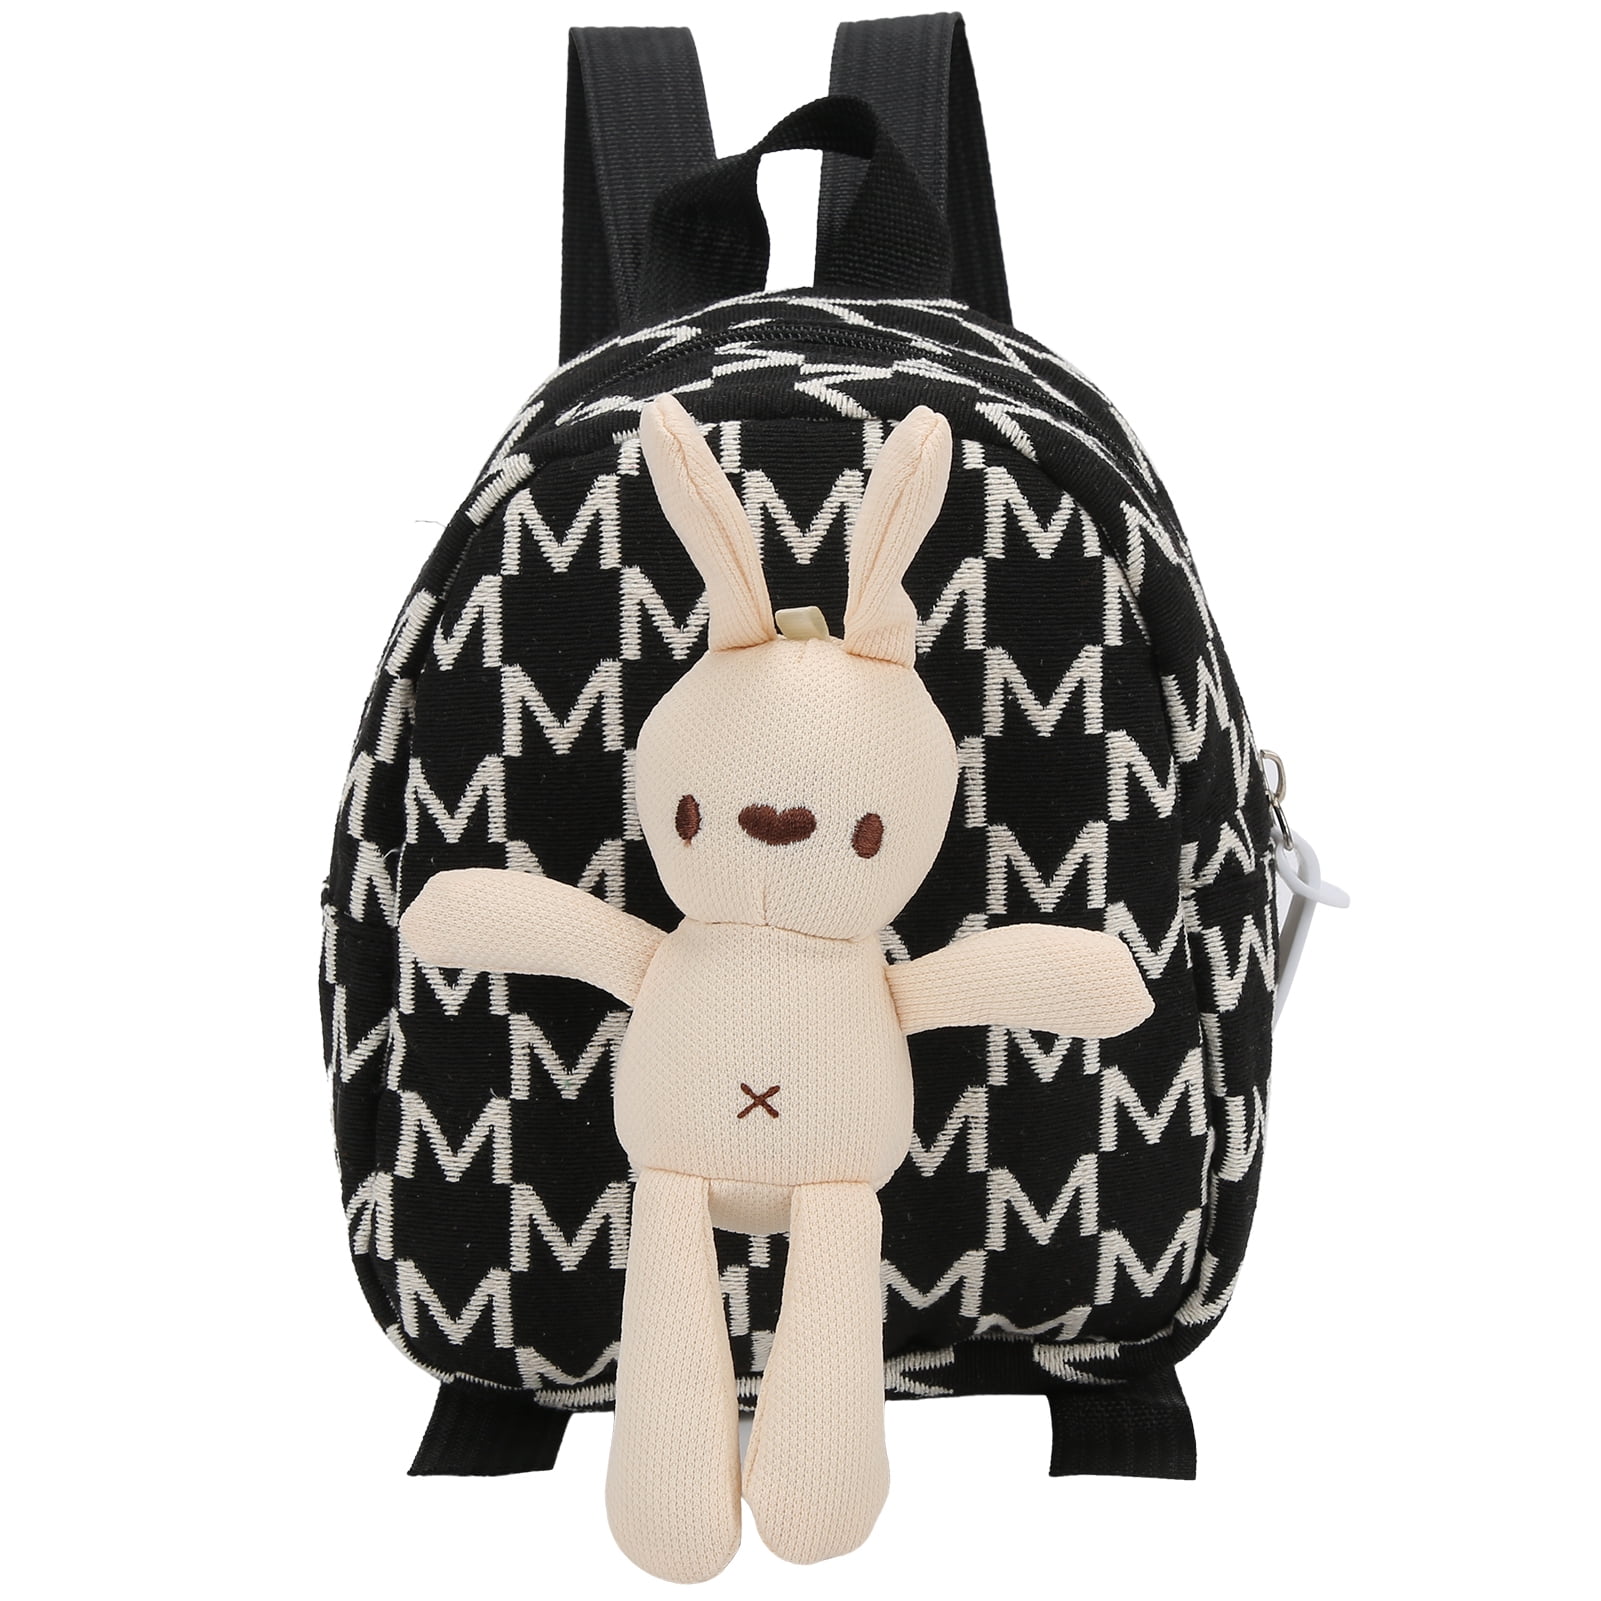 Preschool Bag, Soft And Skin-Friendly Backpack Shoulder Strap Cute Animal  Cartoon With Plush Toys For Travel For Boys Girls Gift White 